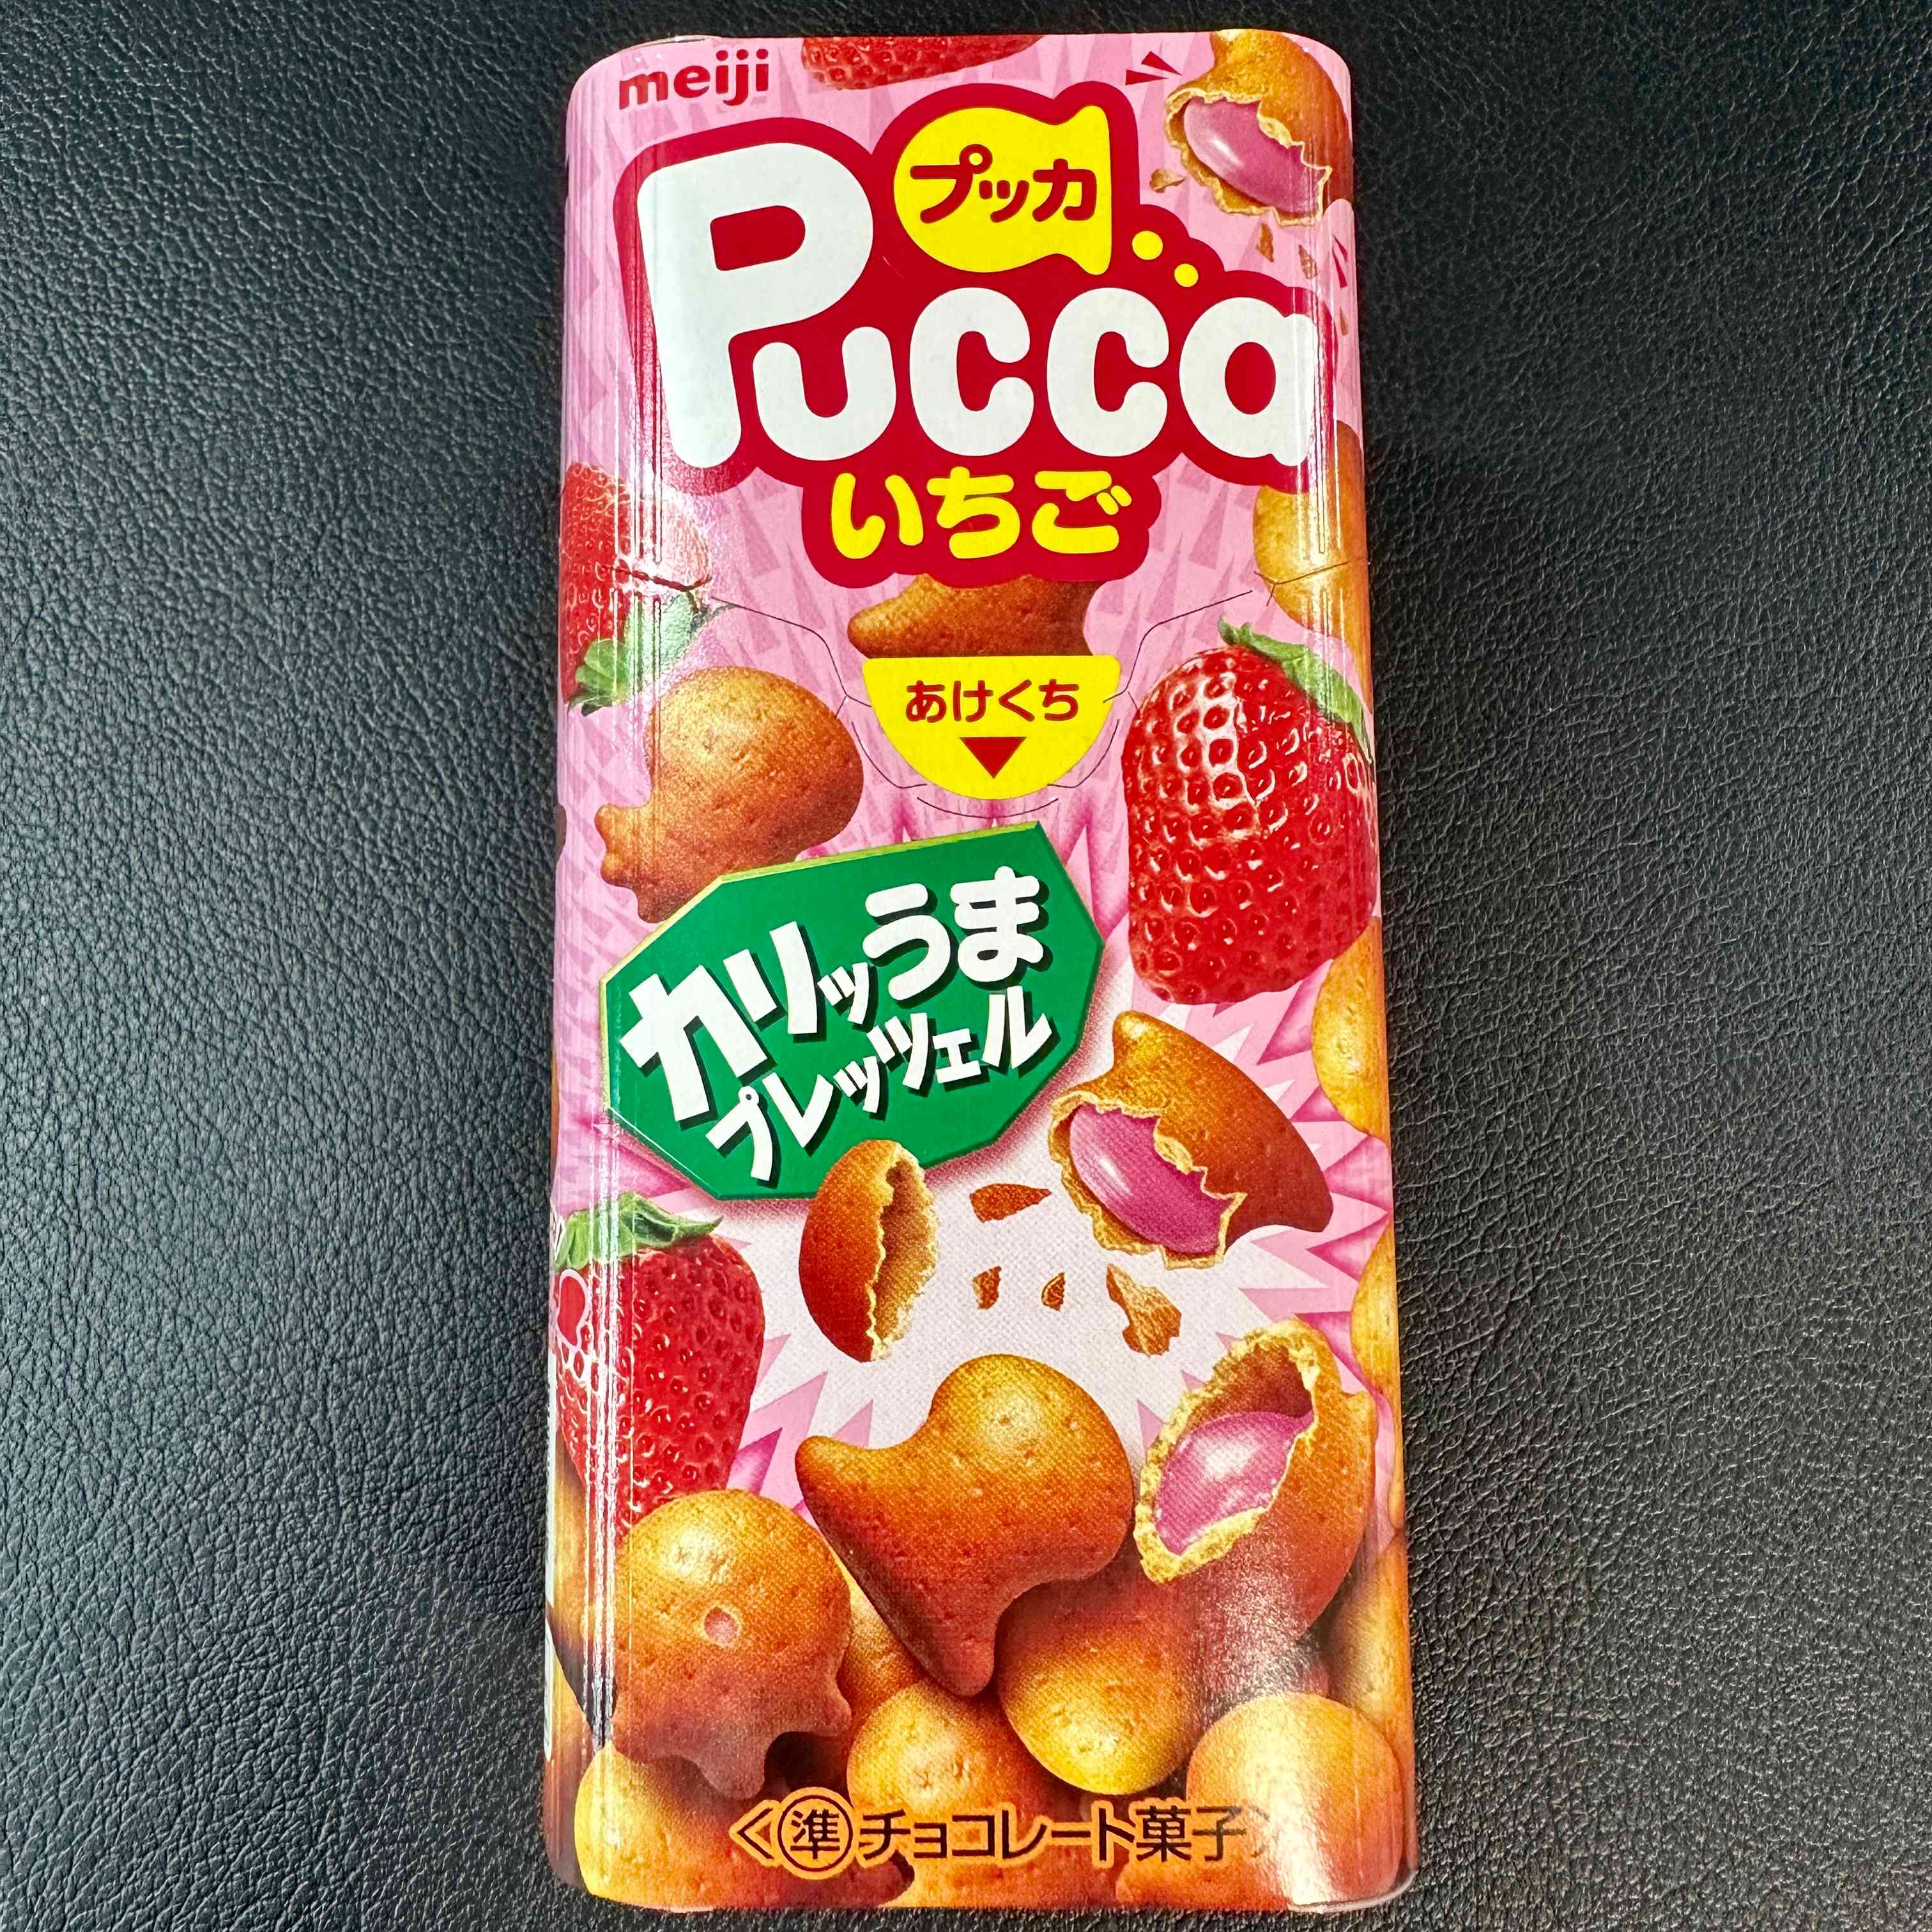 【meiji】Pucca　strawberry　80pieces（1case）　3120ｇ